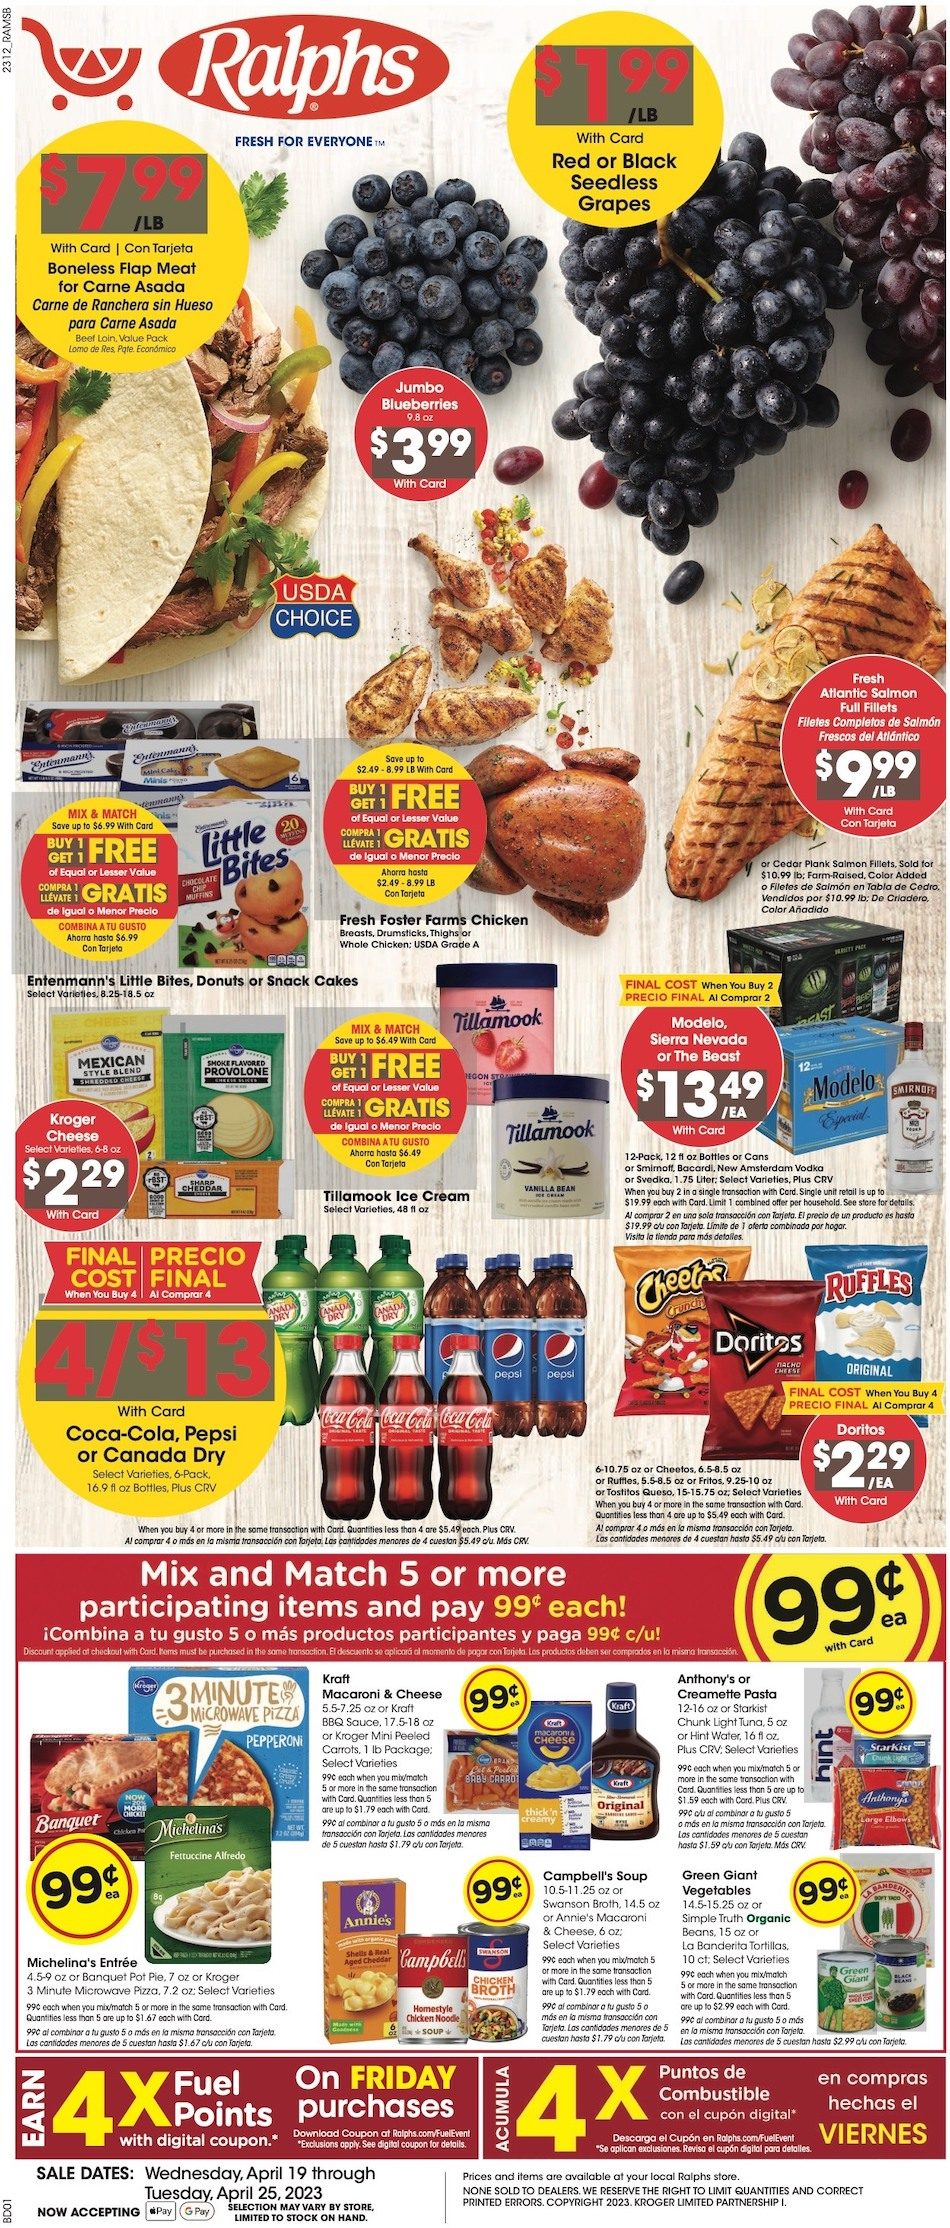 Ralphs Weekly Ad 19th – 25th April 2023 Page 1